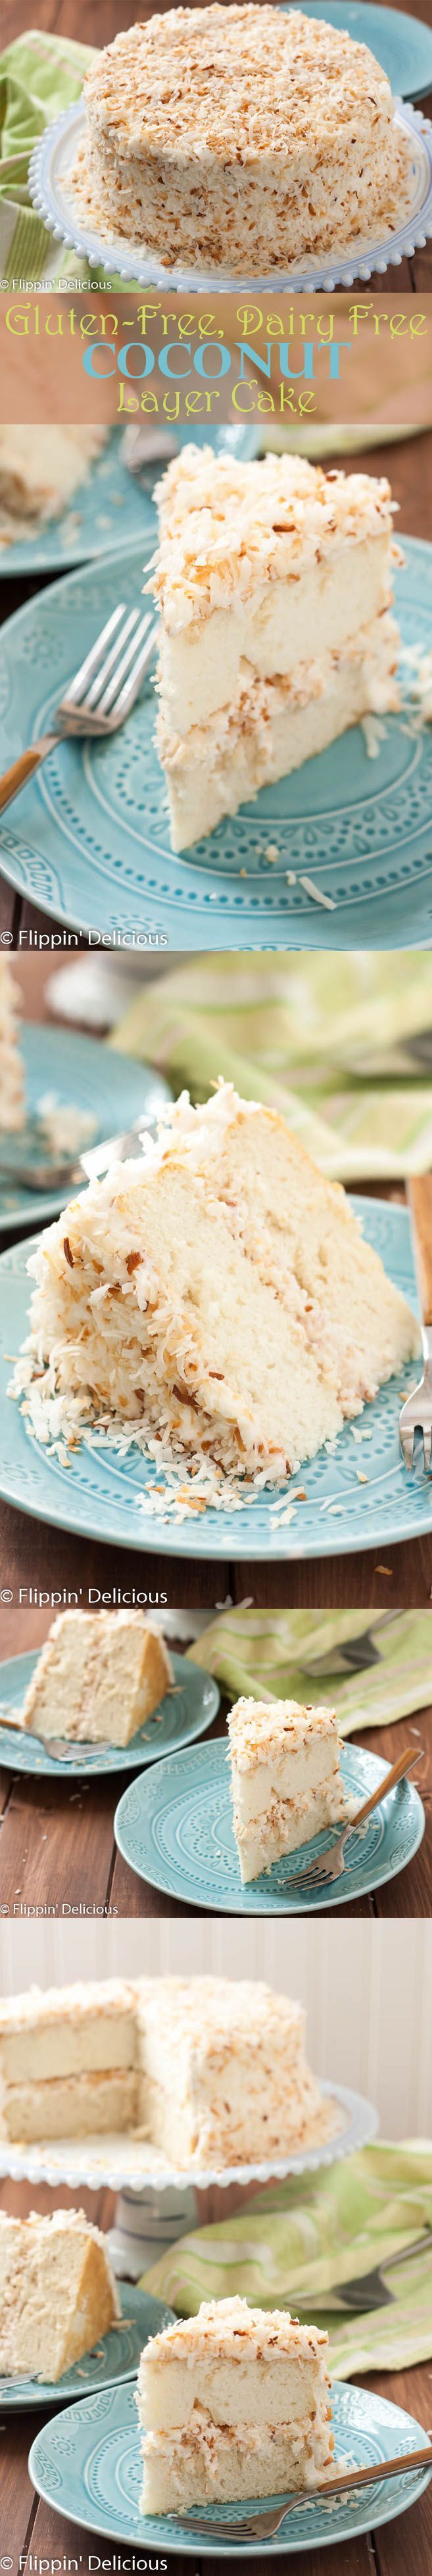 This Dairy Free Gluten Free Coconut Layer Cake is a stunning spring dessert. The t